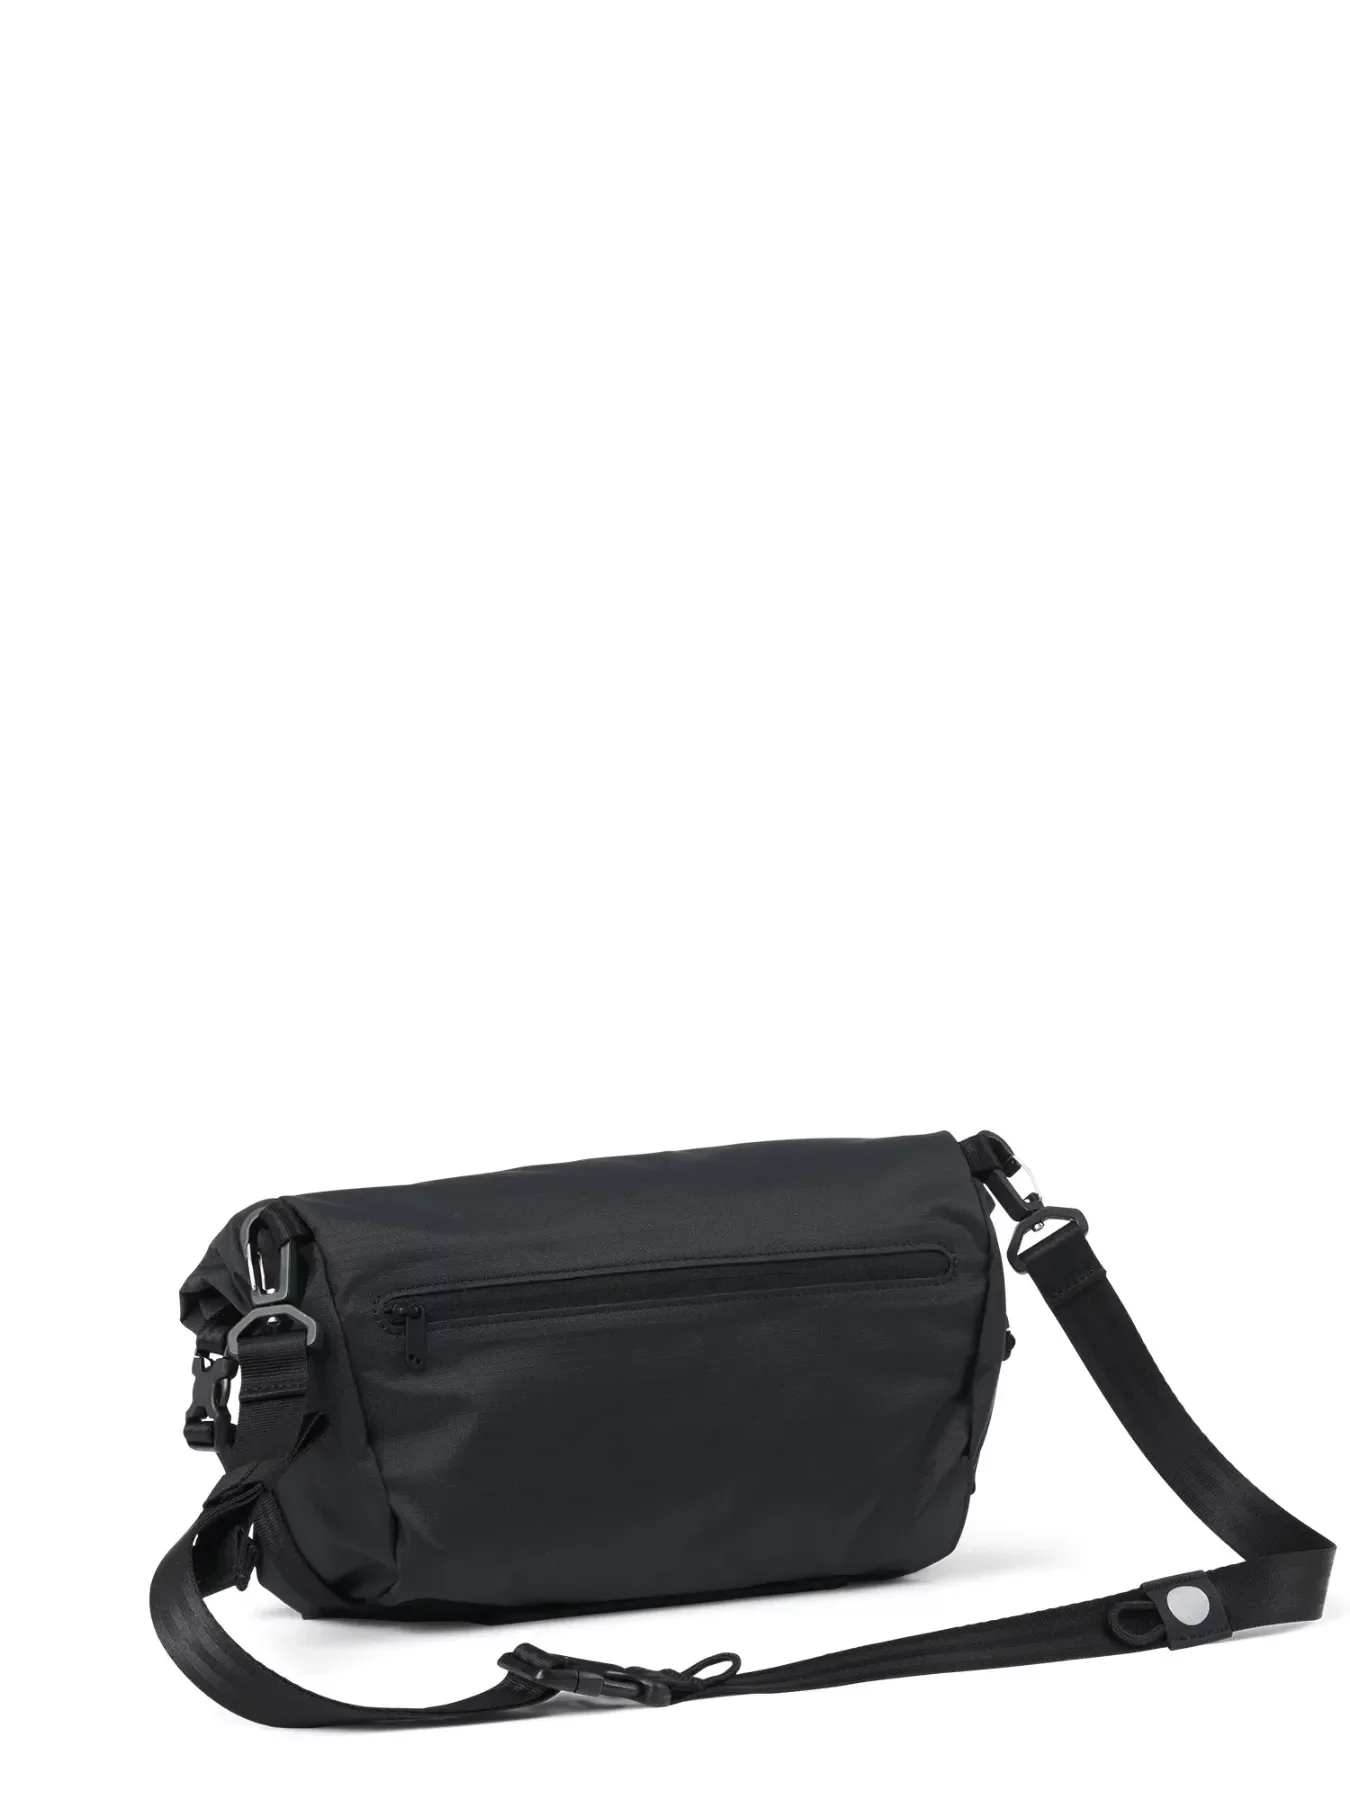 pinqponq Backpack AKSEL - Pure Black 8